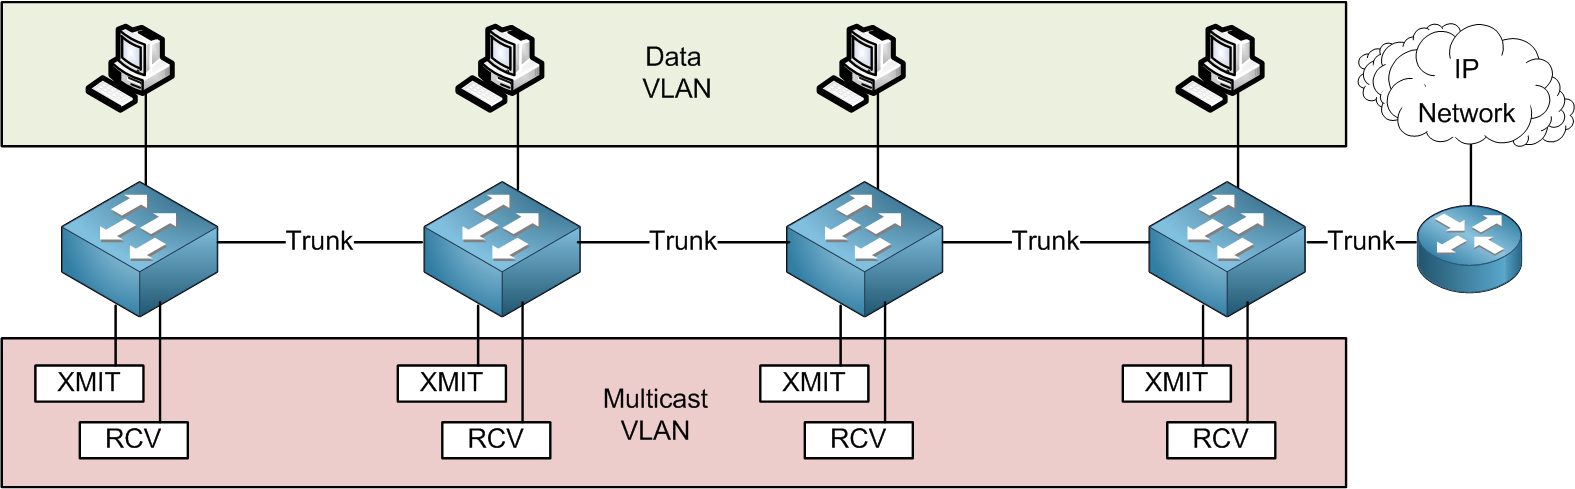 Shared Infrastructure Shared 1 Shared 2 1. Choose a multicast address range between 234.0.0.0-238.255.255.255 for the streaming application. a. Remember that each Producer channel will require an individual multicast address.